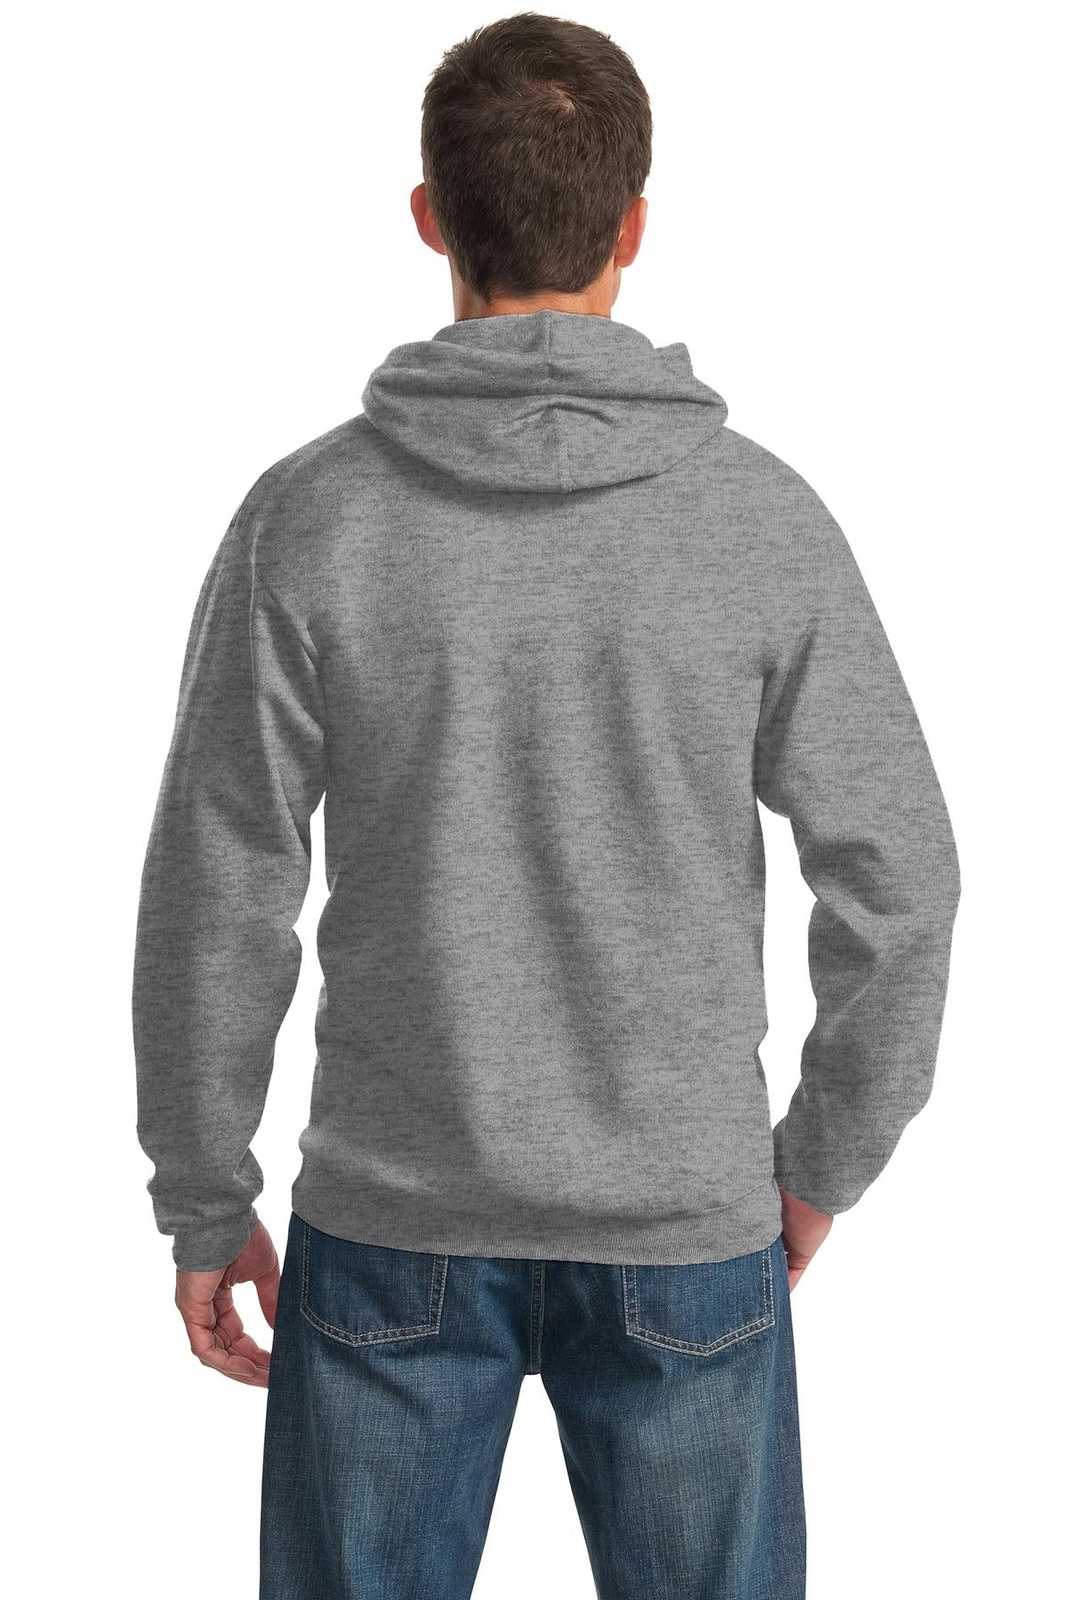 Port & Company PC90H Essential Fleece Pullover Hooded Sweatshirt - Athletic Heather - HIT a Double - 1